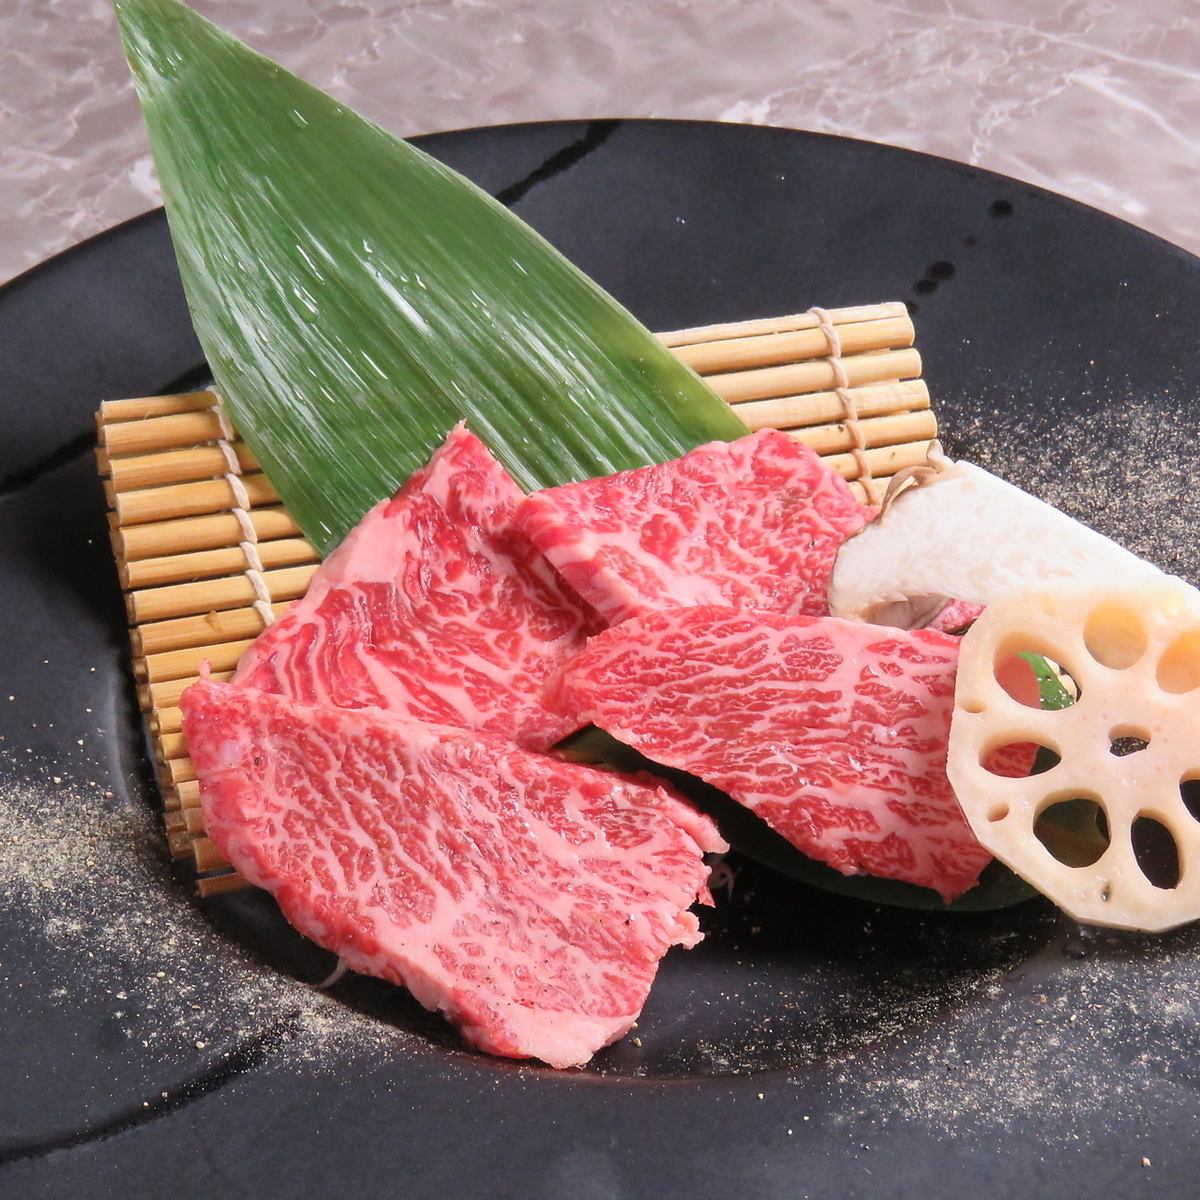 When it comes to robata yakiniku, “Kan” is exquisite♪